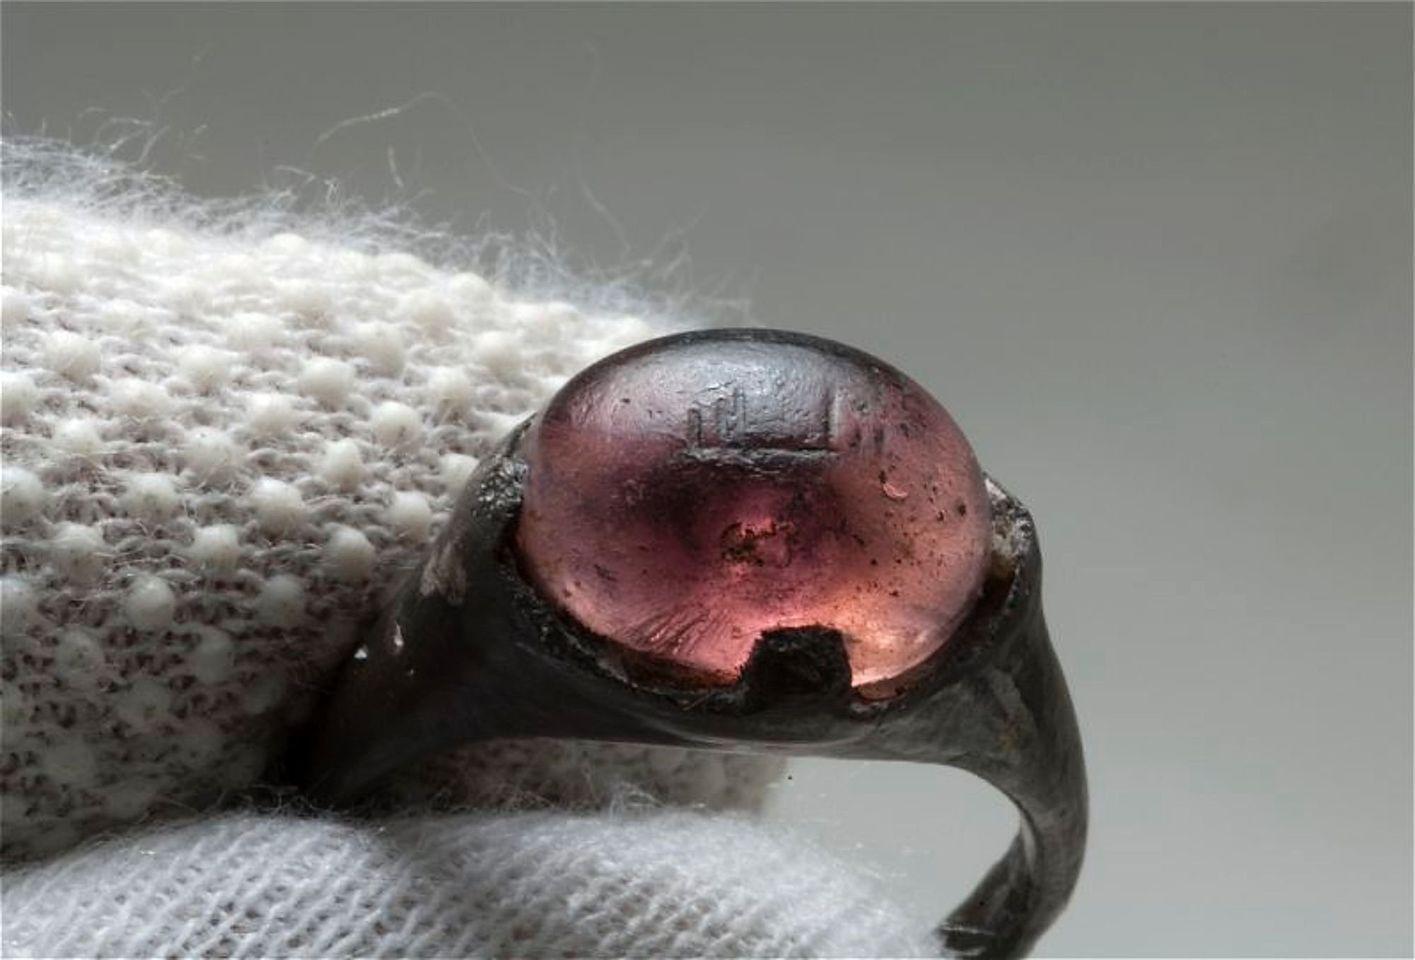 A Viking skills ring inscribed with the phrases ‘for Allah’, figured out within the grave of a girl who used to be buried 1200 years within the past in Birka, 25 km west of popular-day Stockholm